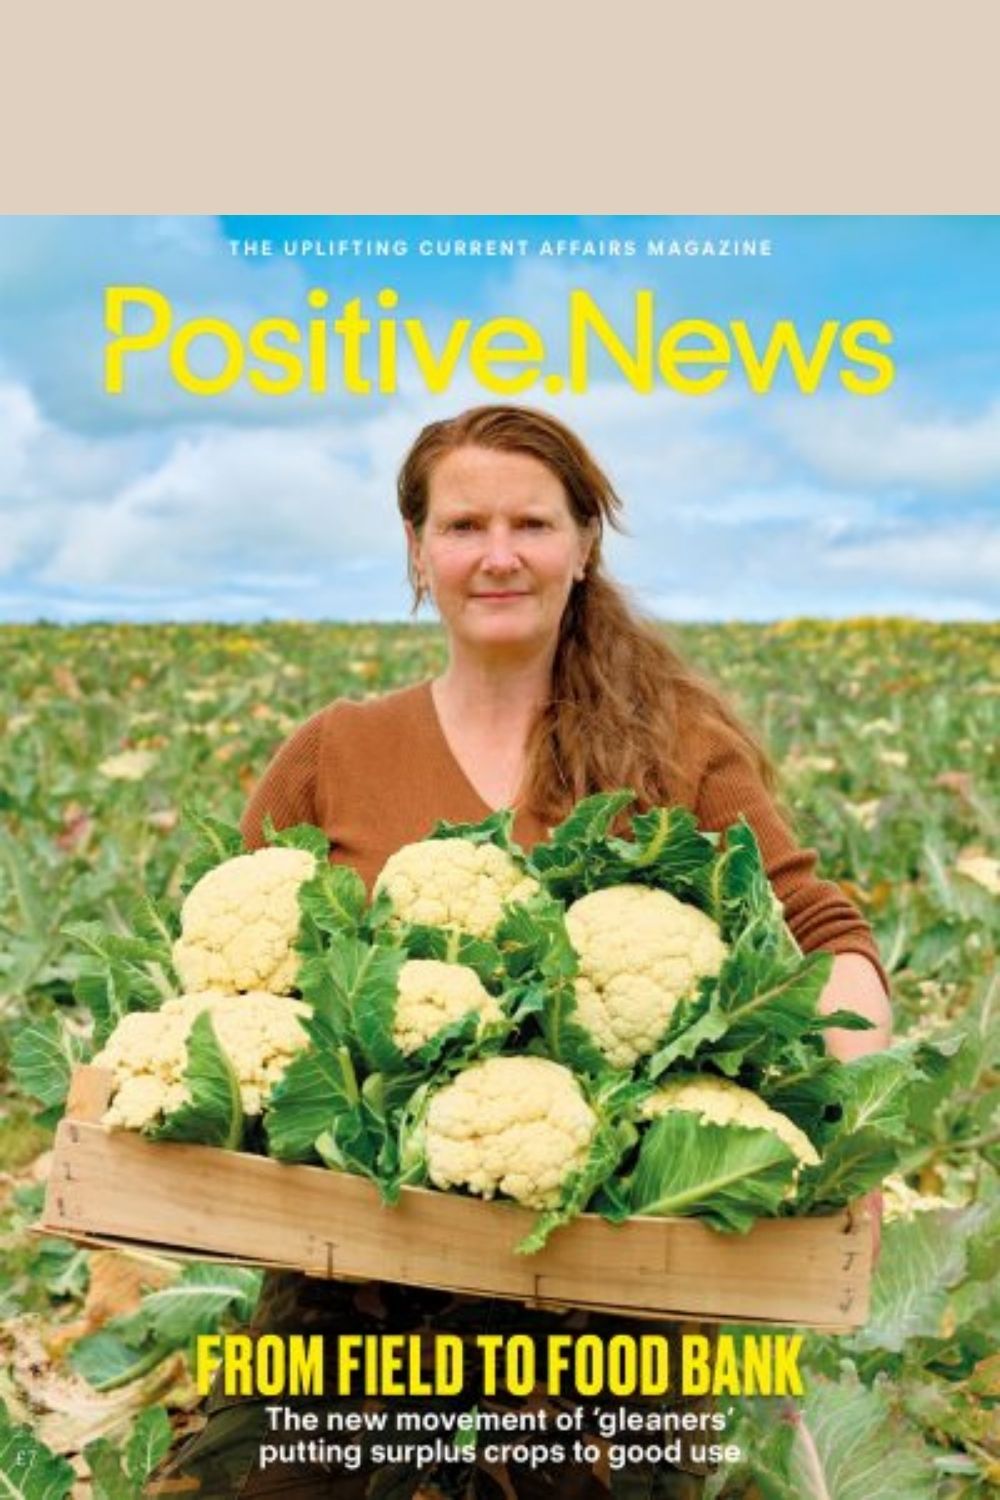 independent female farmer carrying cauliflowers on the cover of Positive News